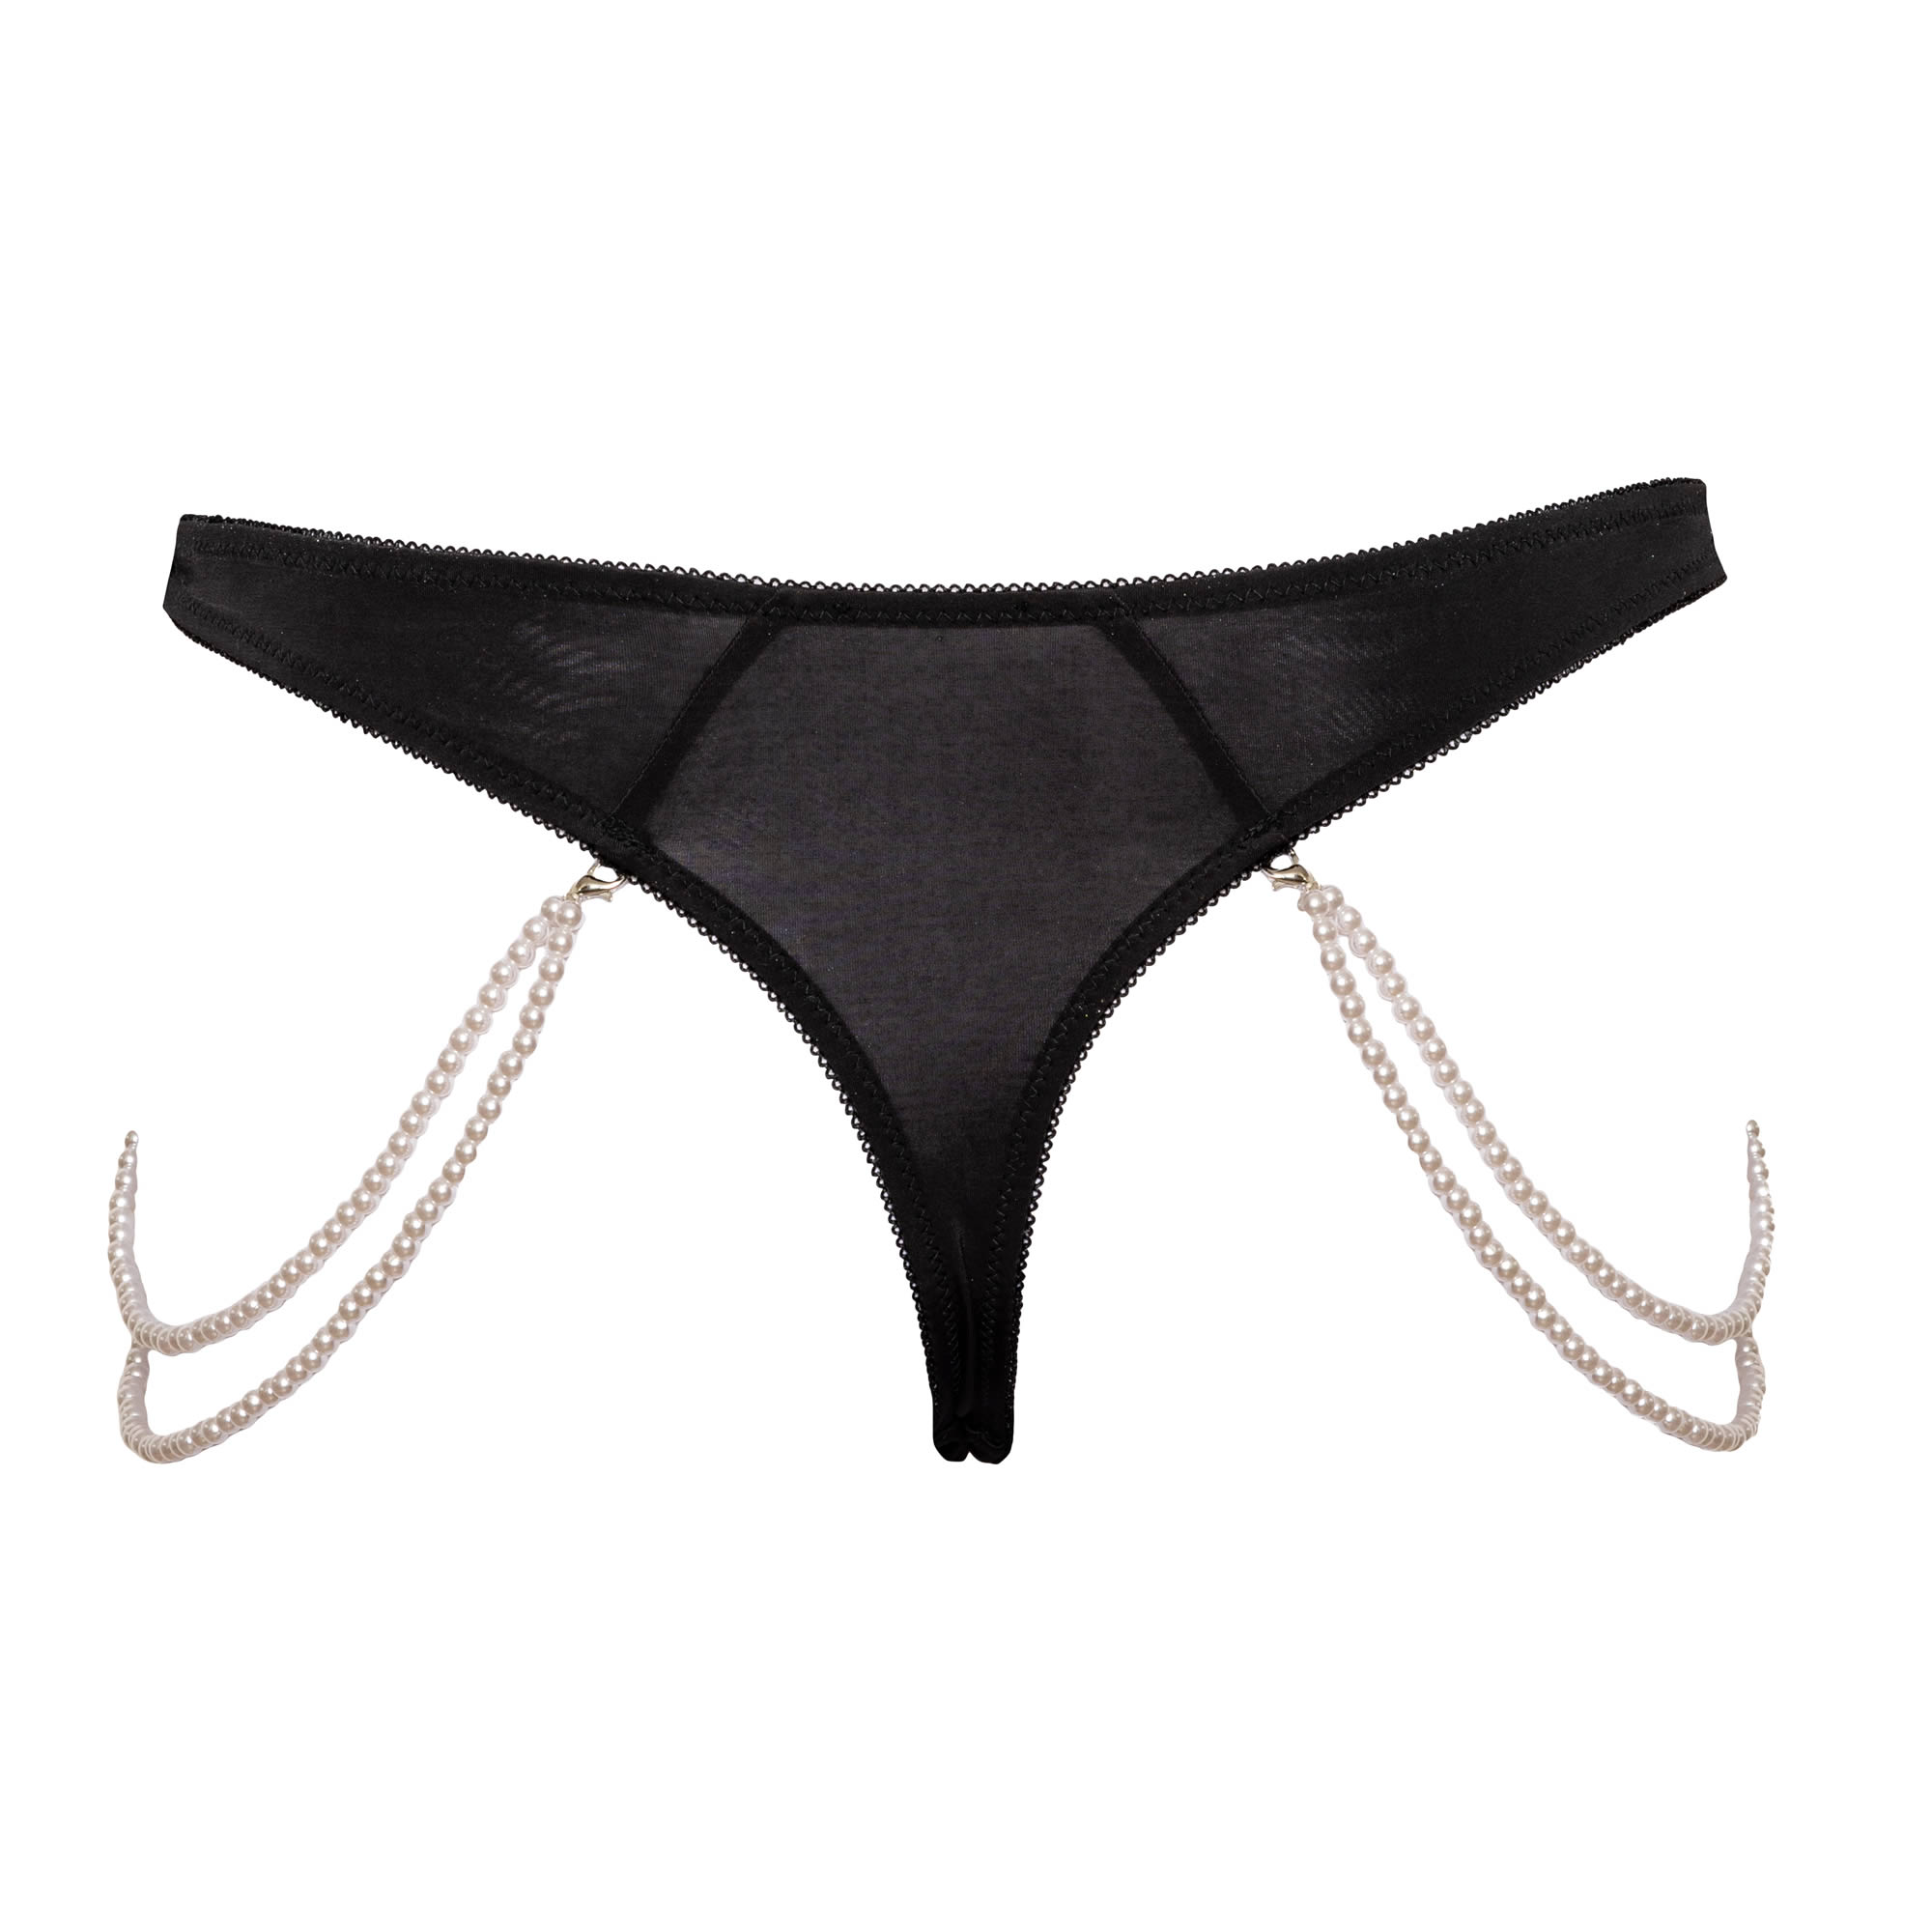 Embroided G-string with Pearl Chains